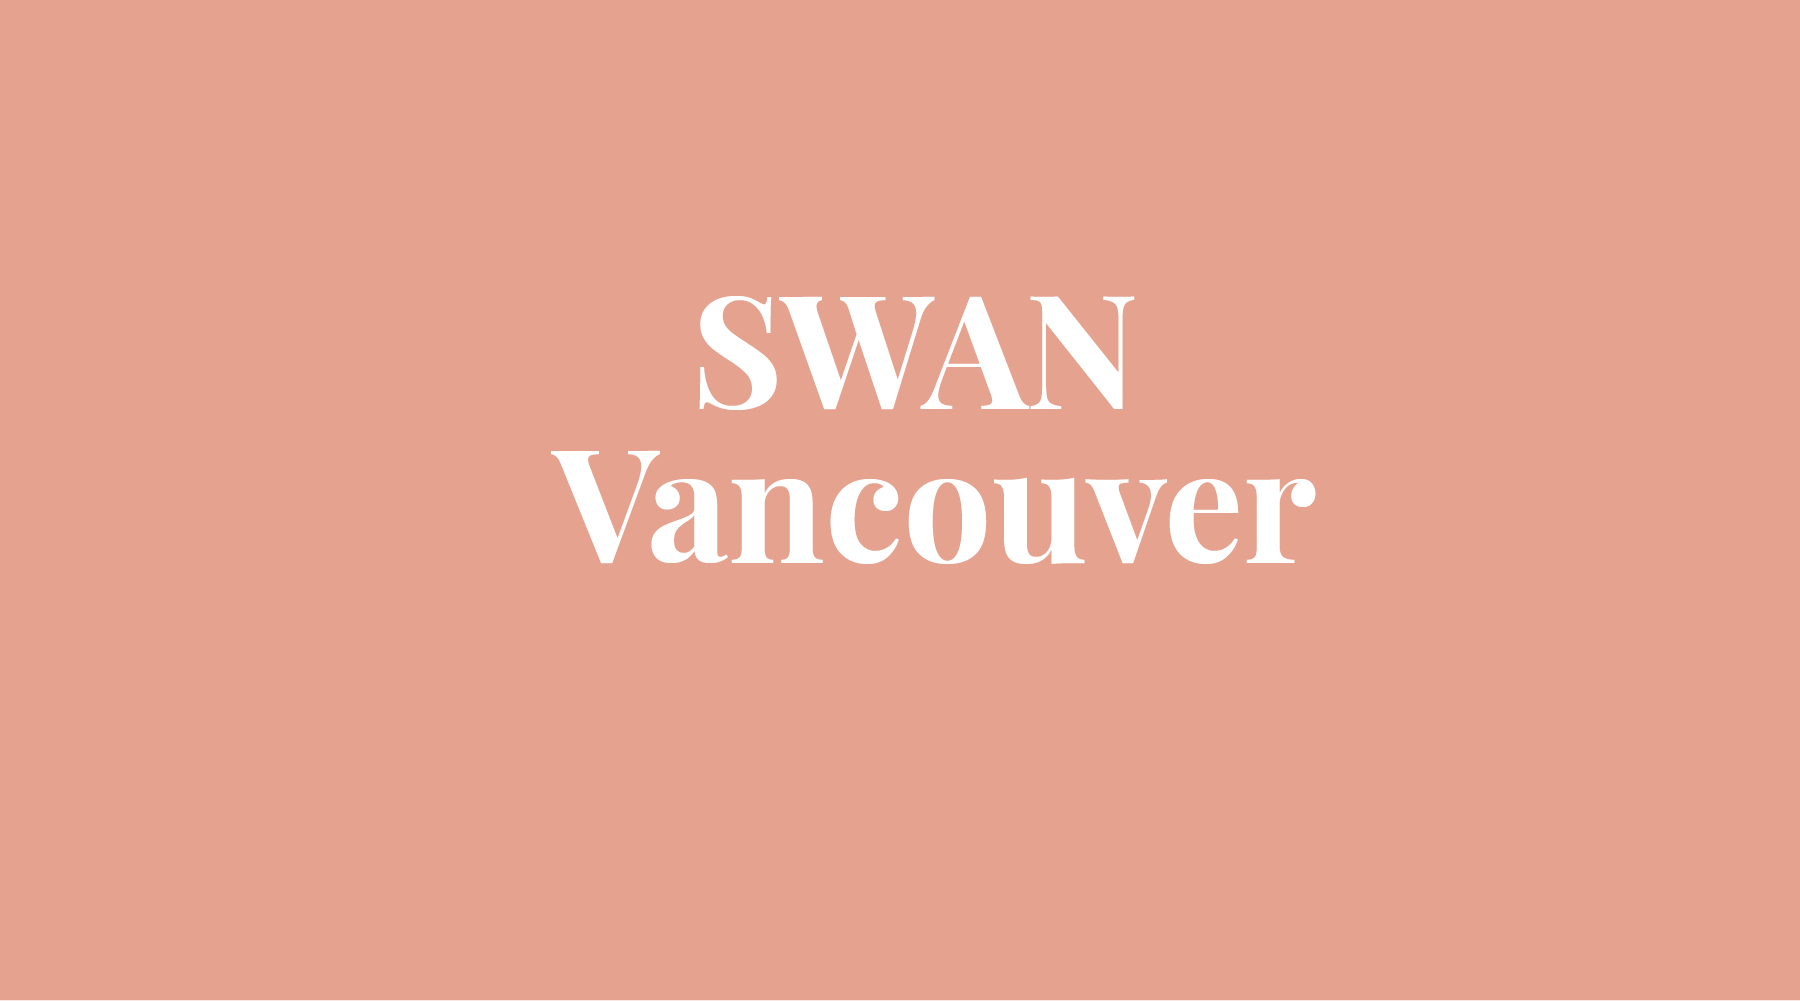 SWAN Vancouver - Donation Matching Campaign